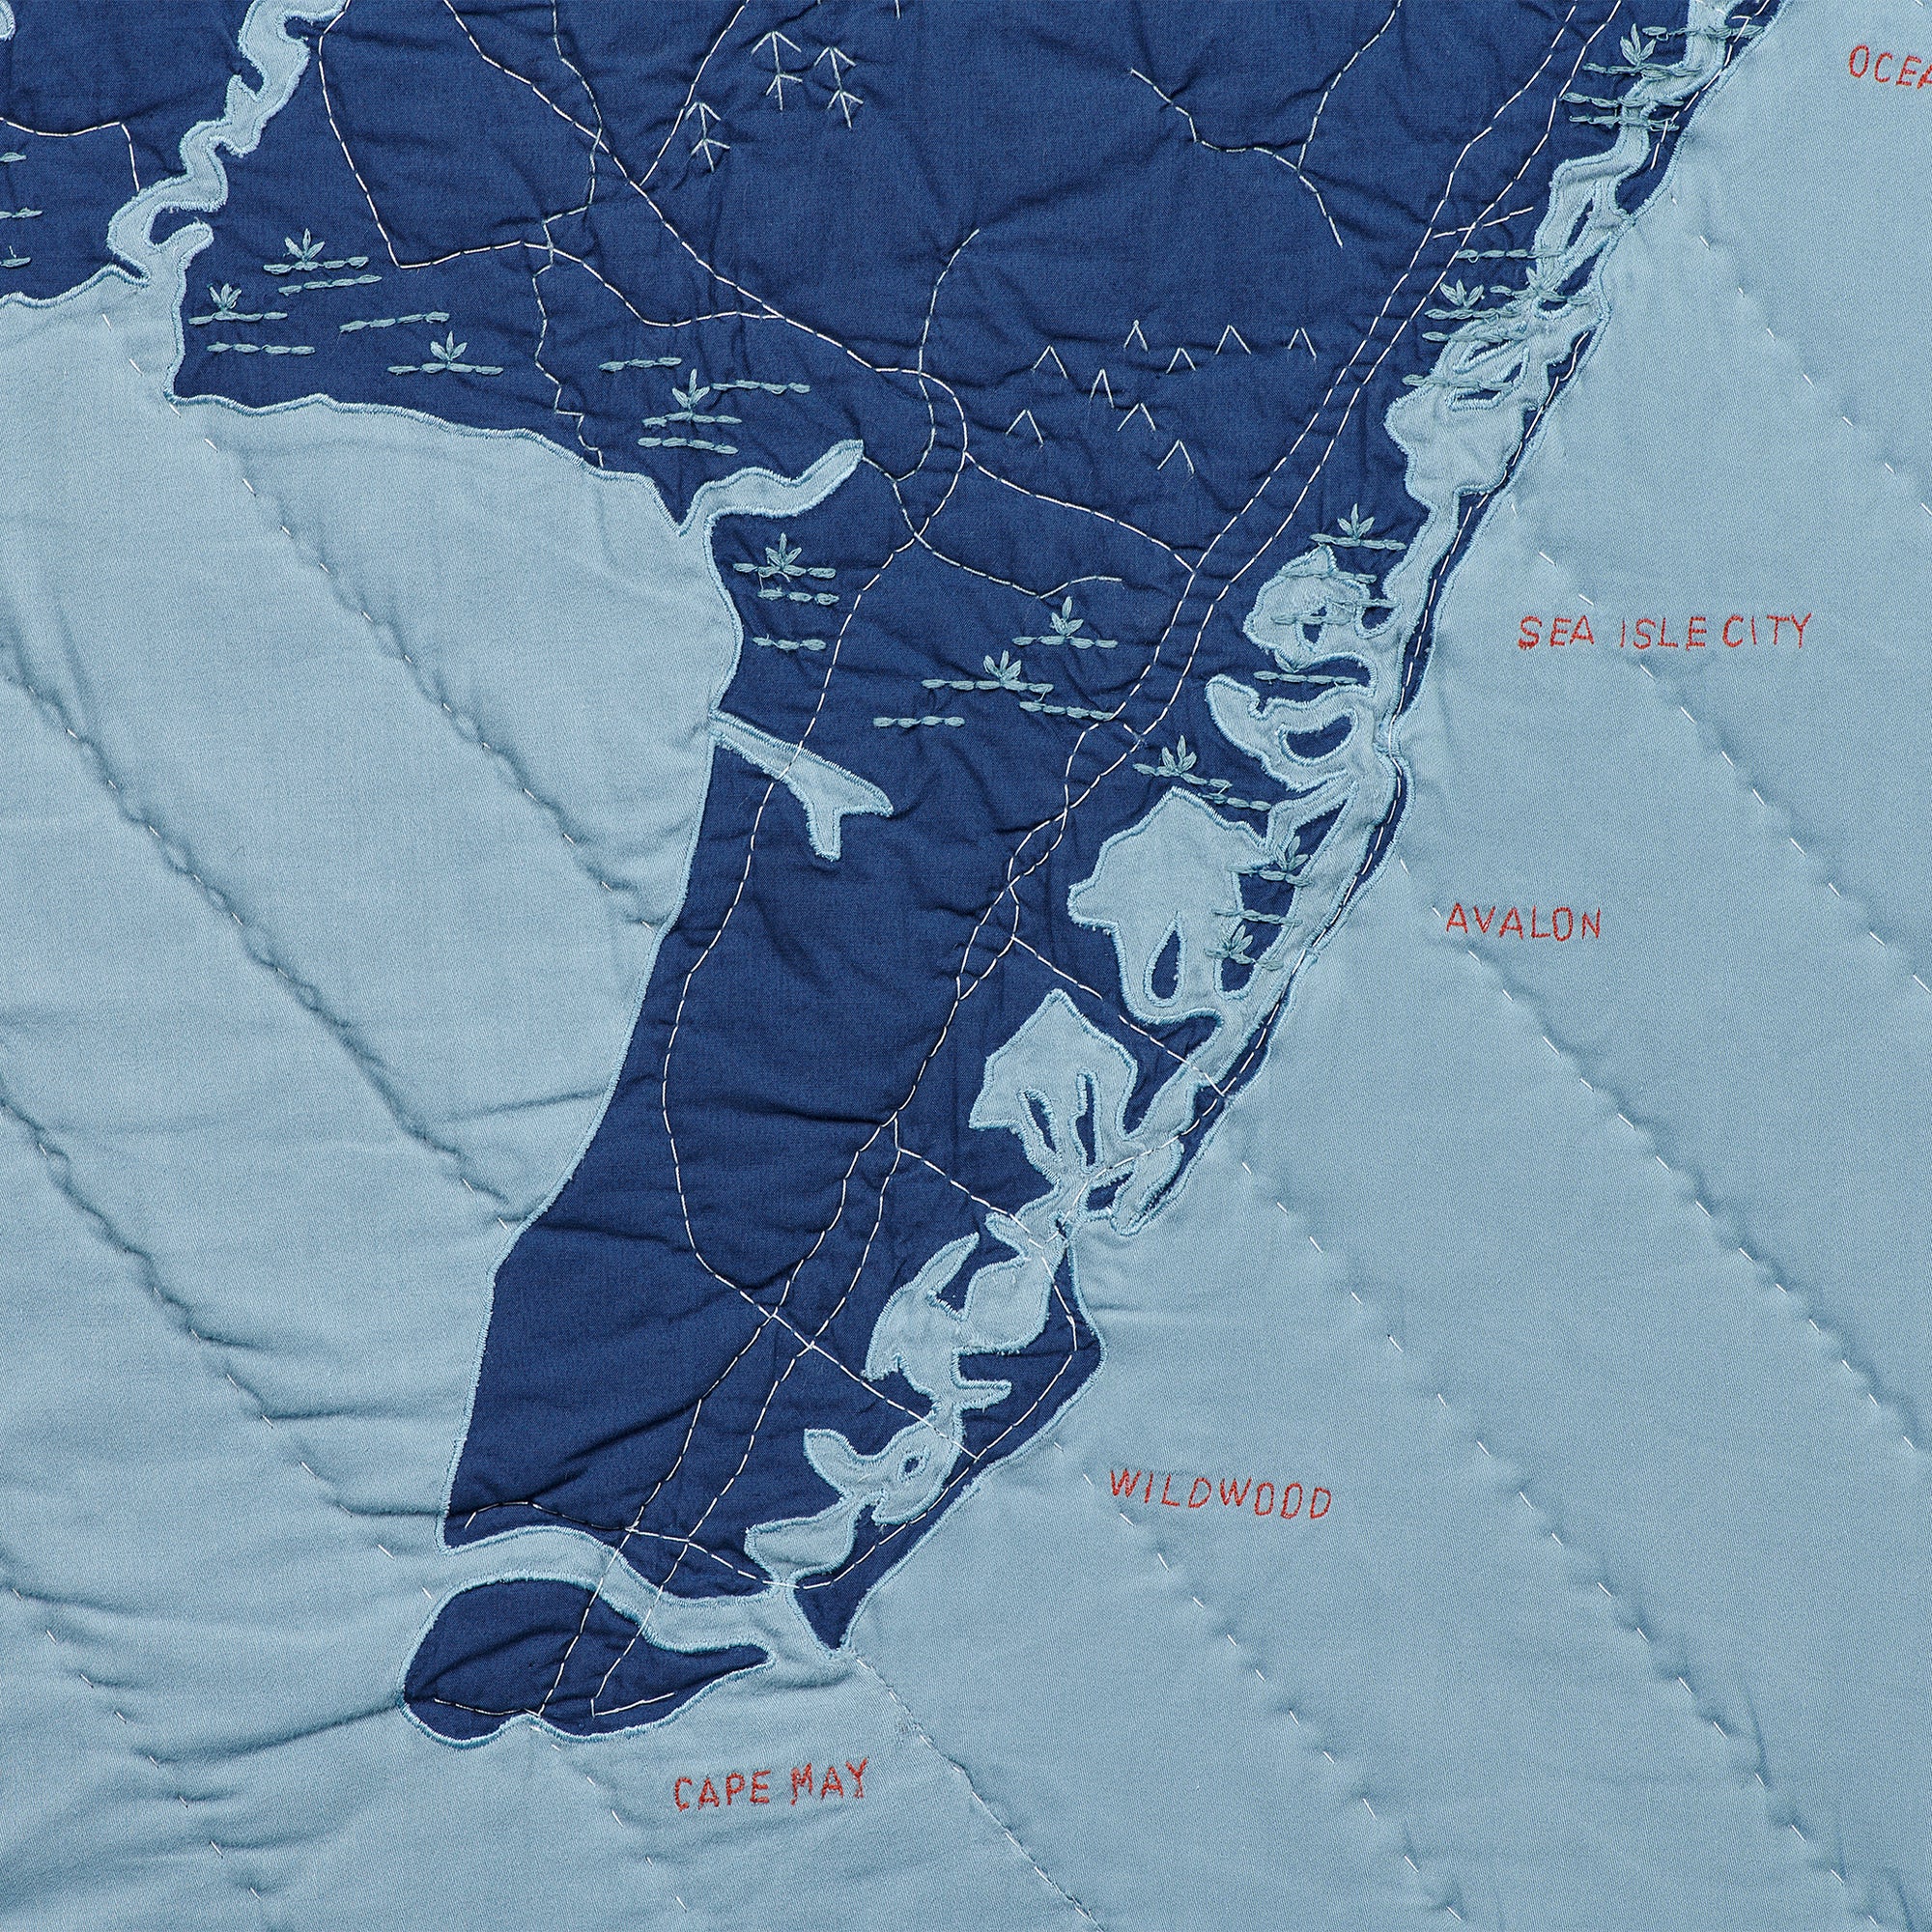 Detail Shot of the Jersey shore coastal quilt from Cape May to Sea Isle City in steel blue and navy.